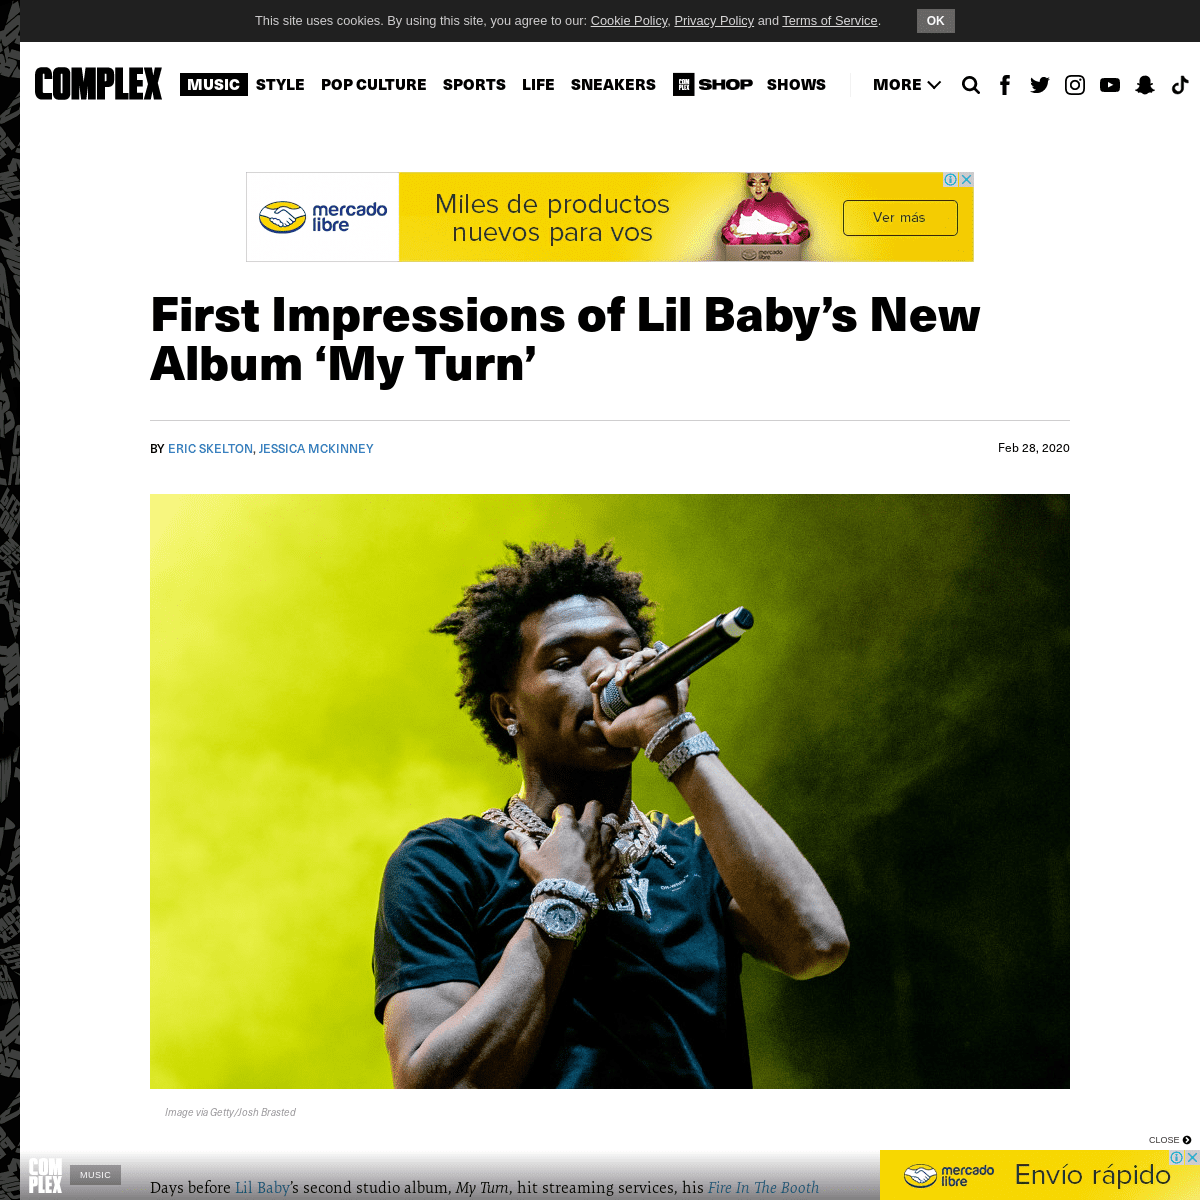 A complete backup of www.complex.com/music/2020/02/lil-baby-new-album-my-turn